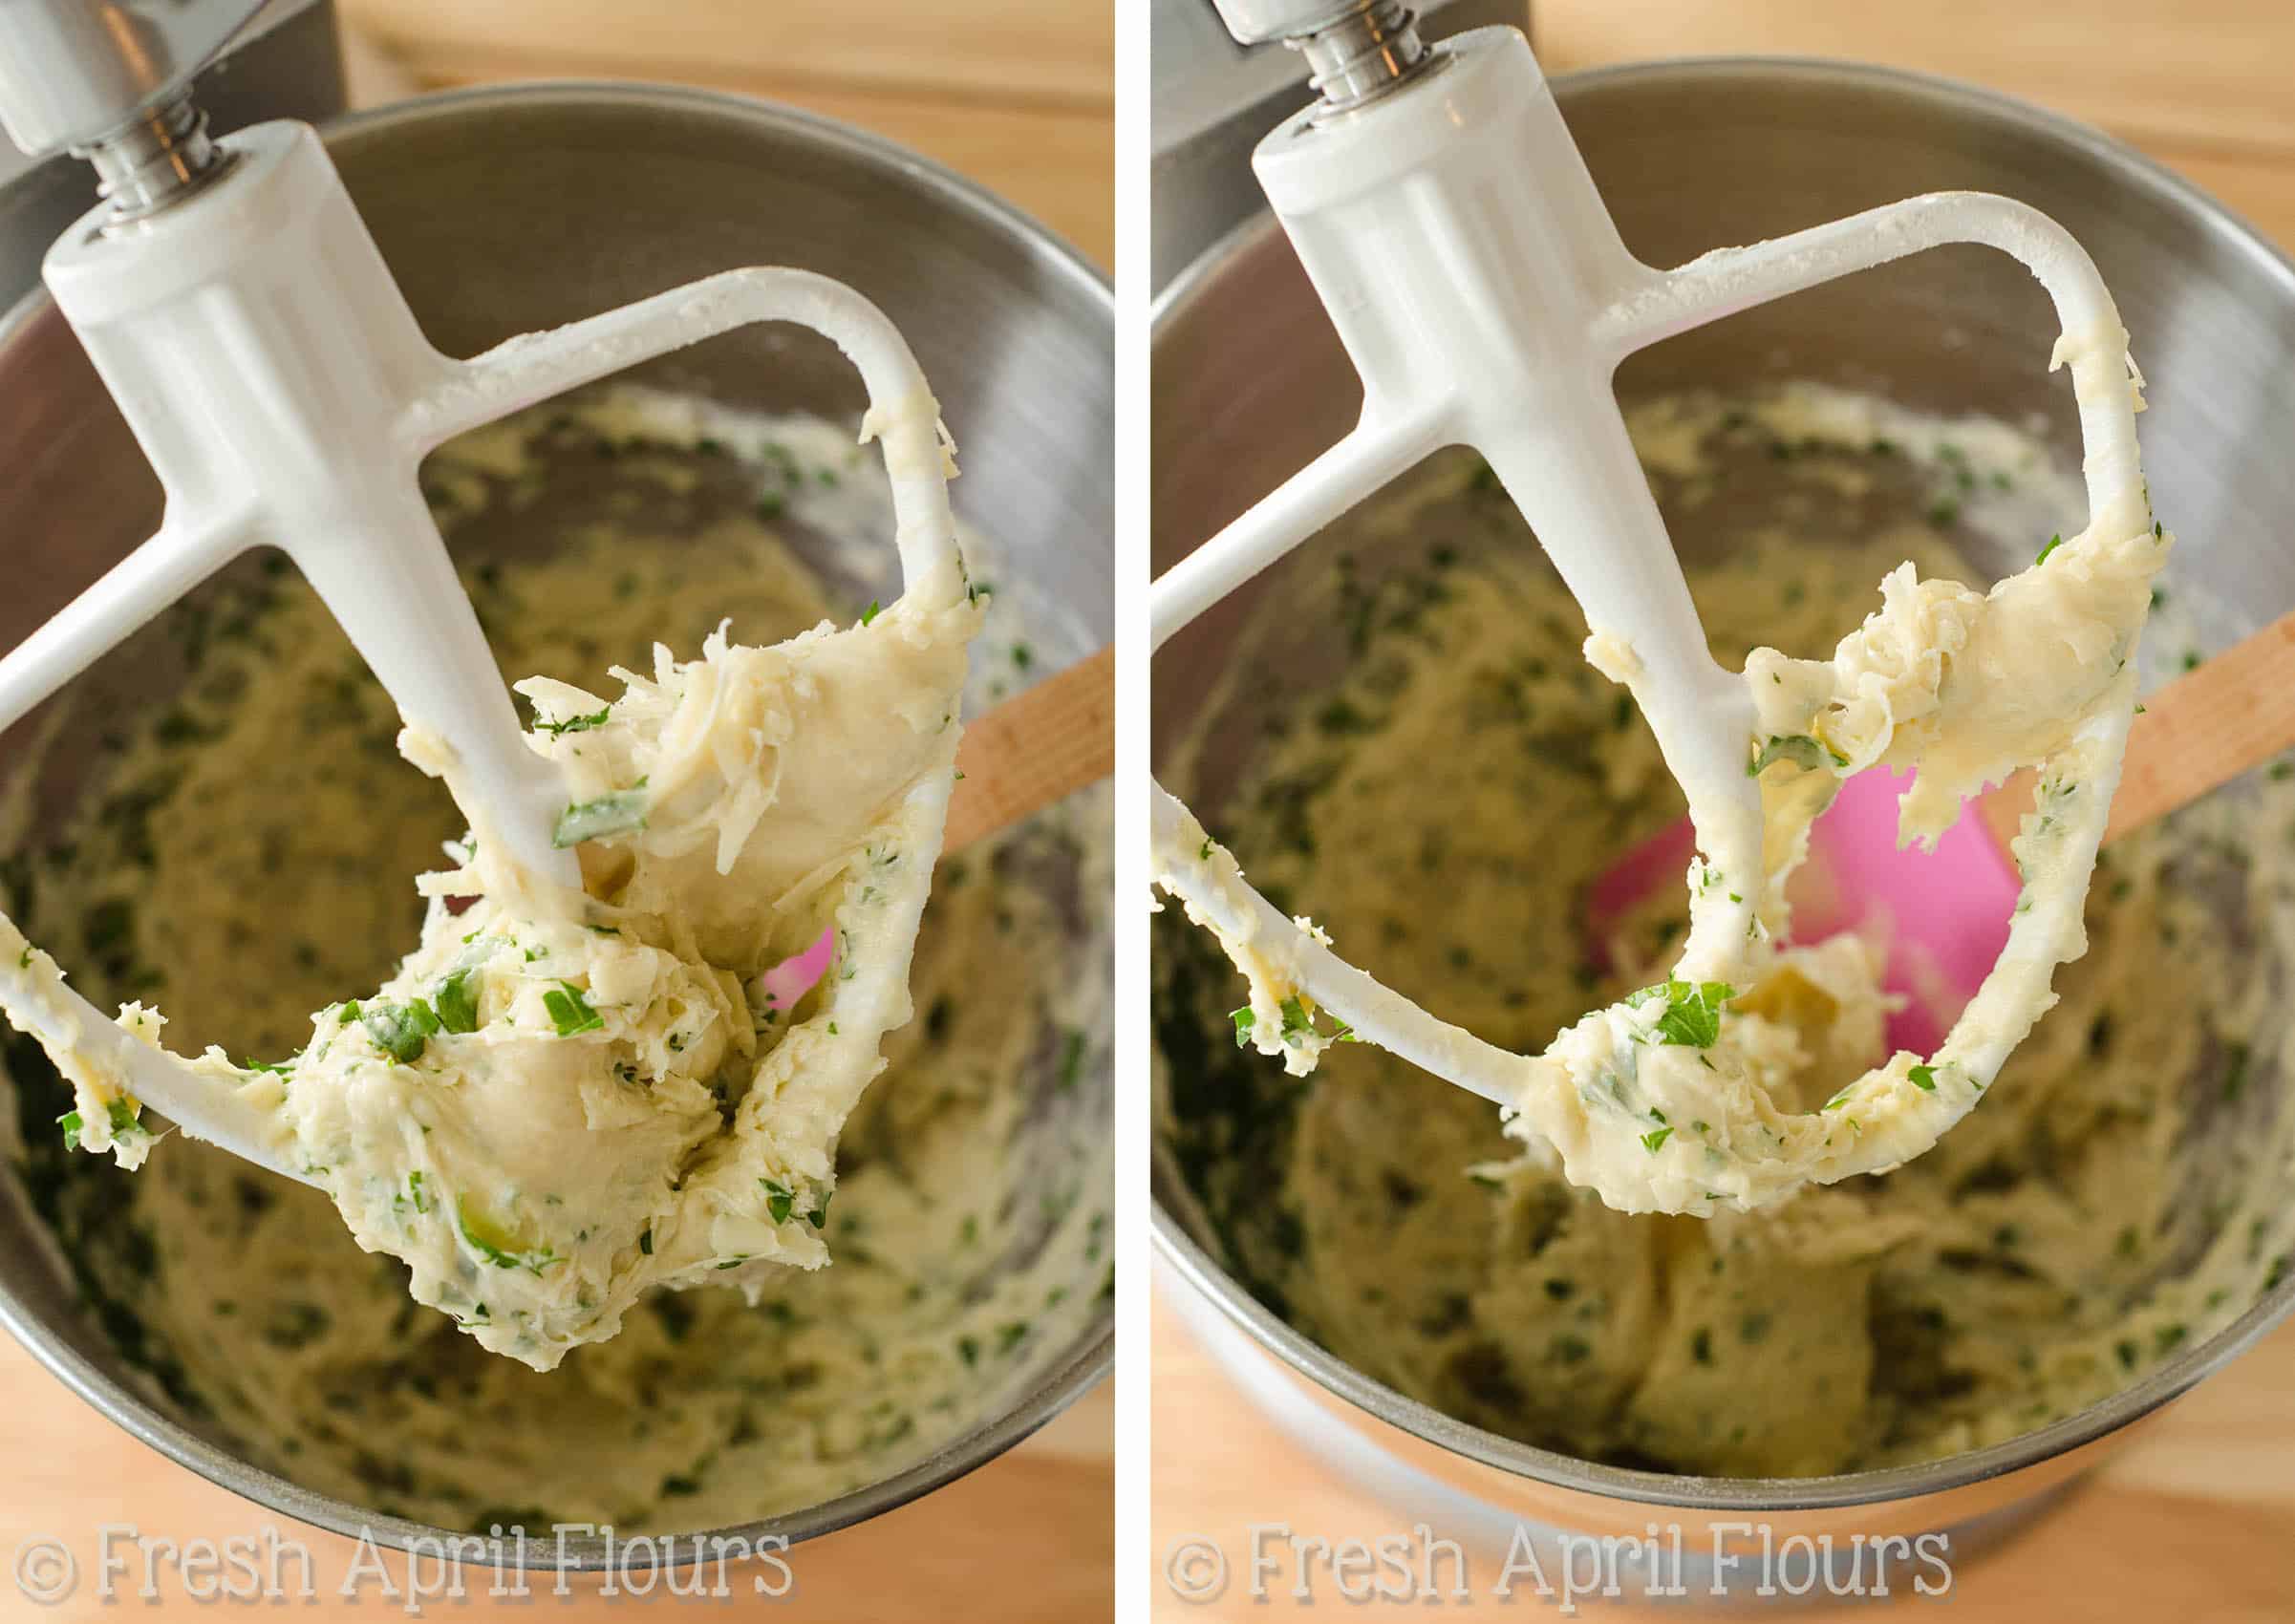 Parmesan parsley bread dough on the beaters of a mixer.